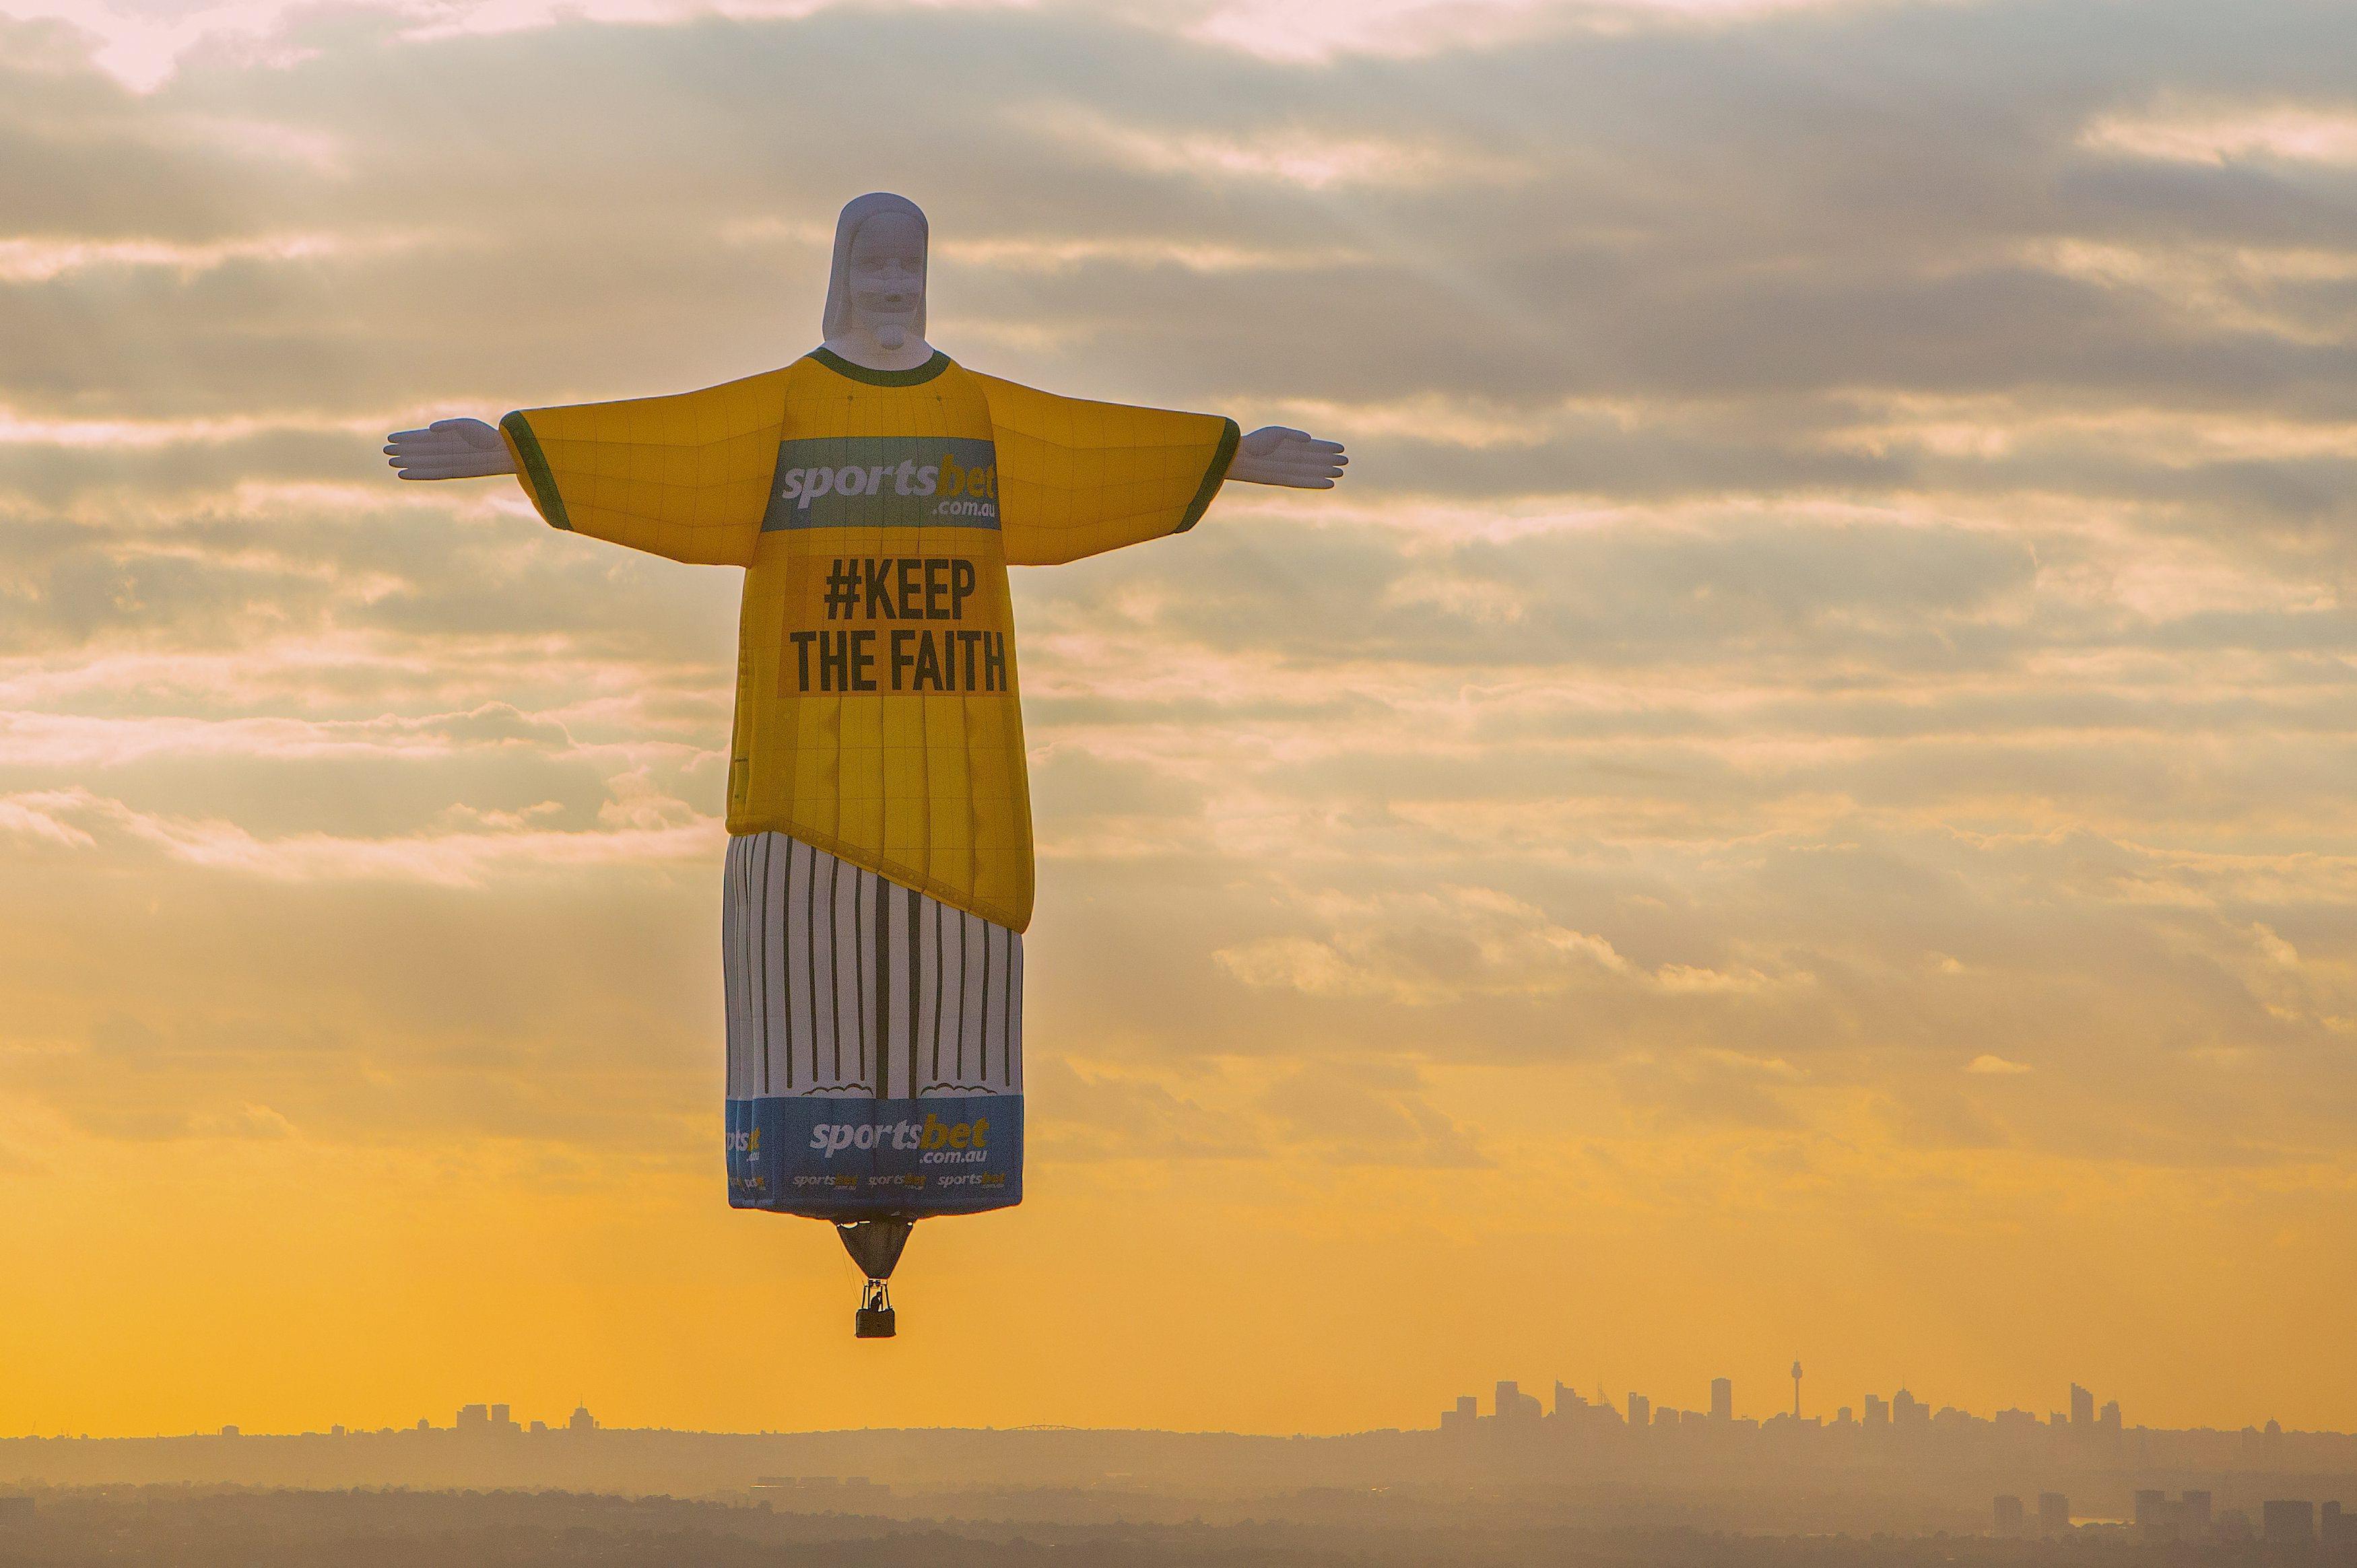 A balloon shaped in the famous 'Christ the Redeemer' statue floats at sunrise as part of an advertis